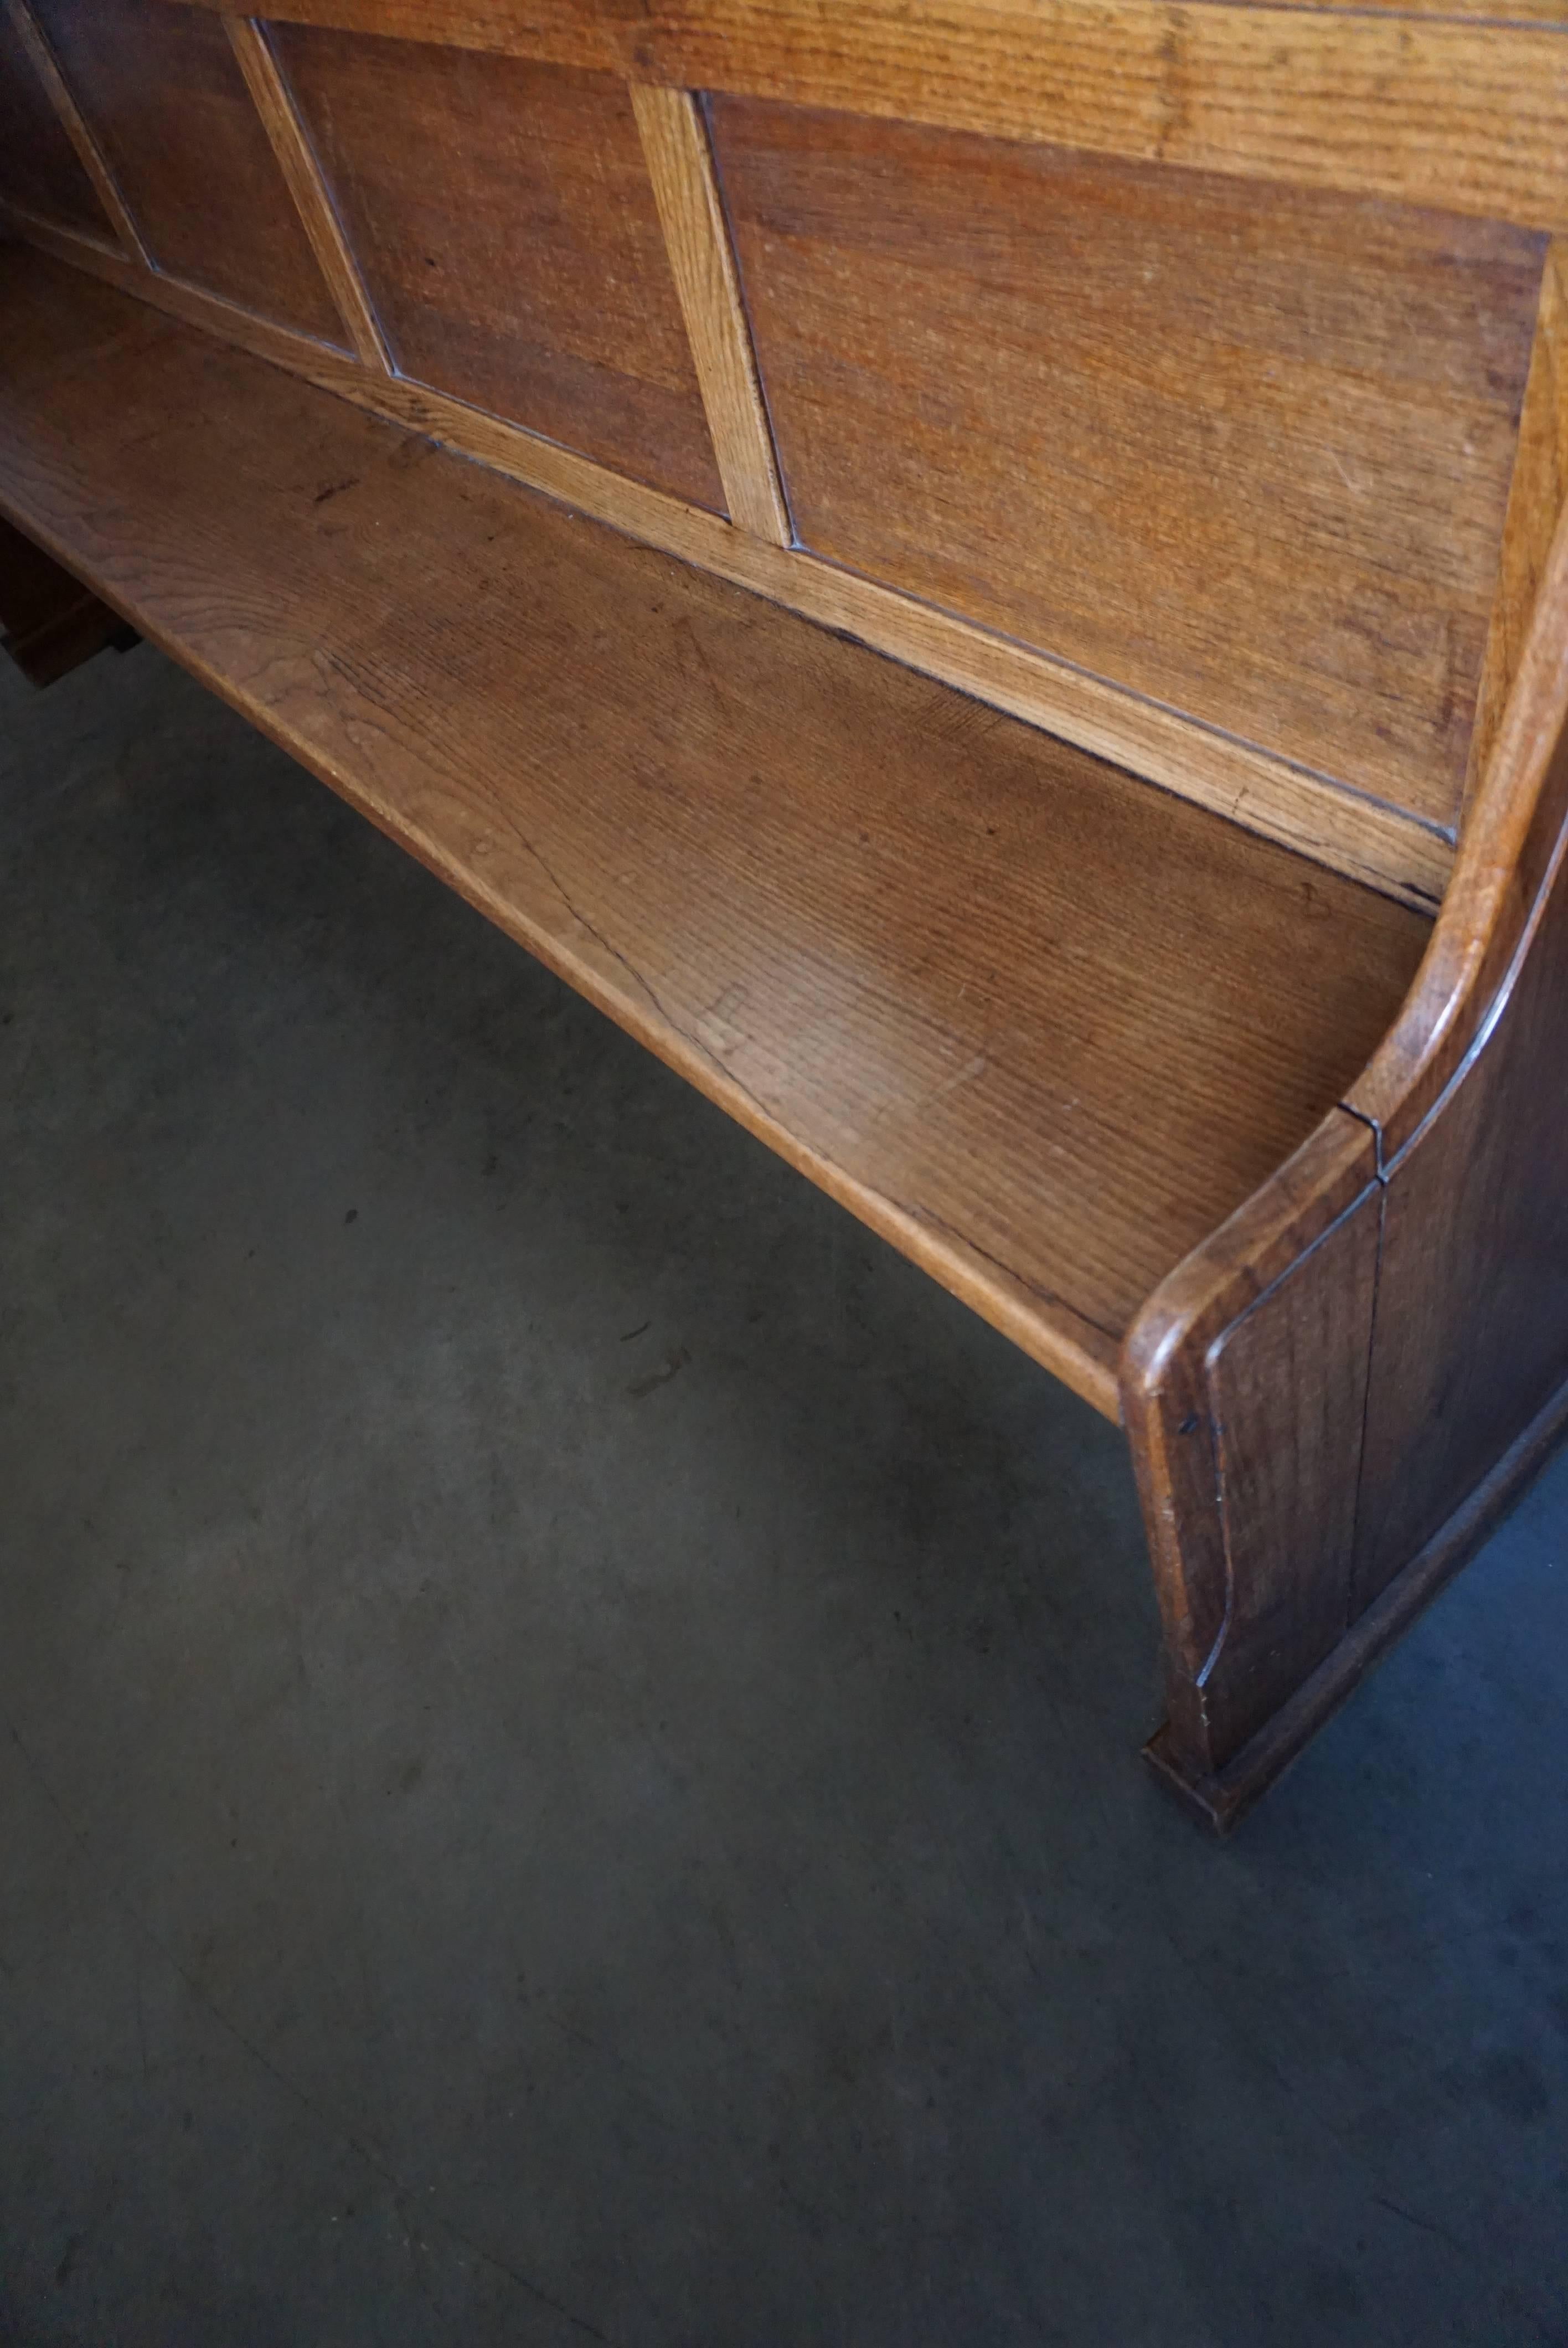 This oak church bench was made and designed circa 1900 in Germany. It is in a good vintage used condition.